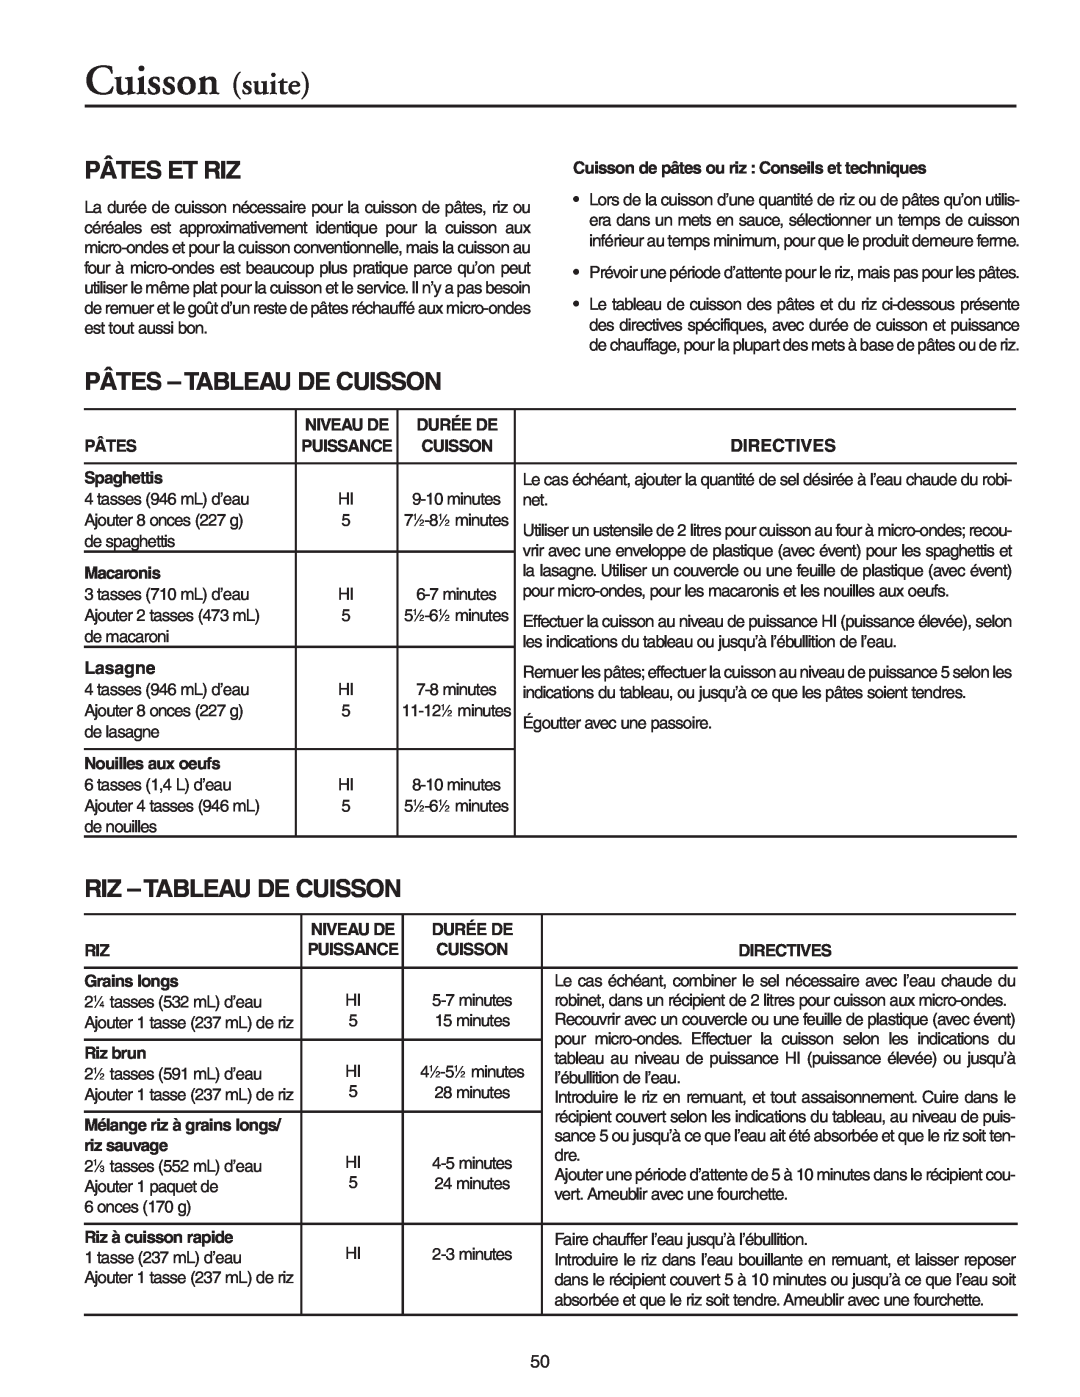 Maytag MMV51566AA/MMV5156AC owner manual Pâtes Et Riz, Pâtes – Tableau De Cuisson, Riz – Tableau De Cuisson, Cuisson suite 